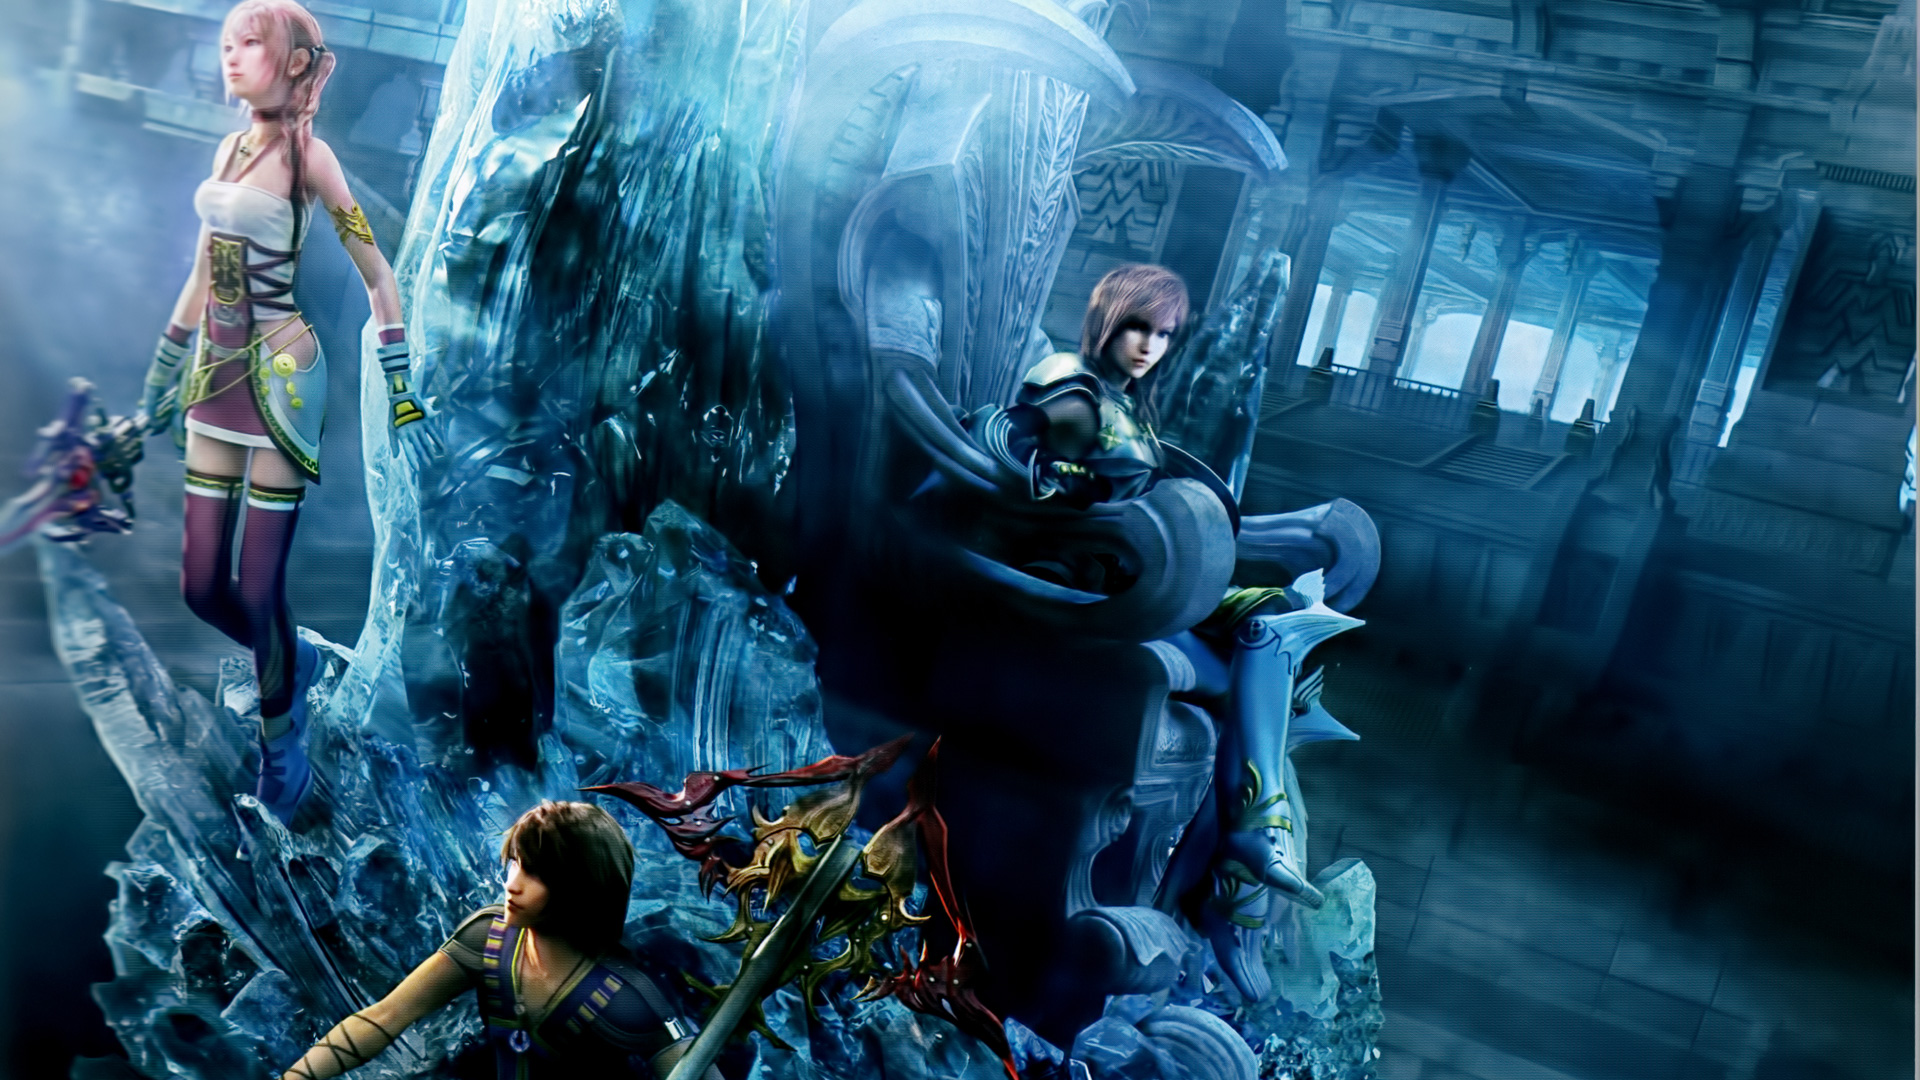 Final Fantasy Xiii Wallpaper Is High Definition You Can